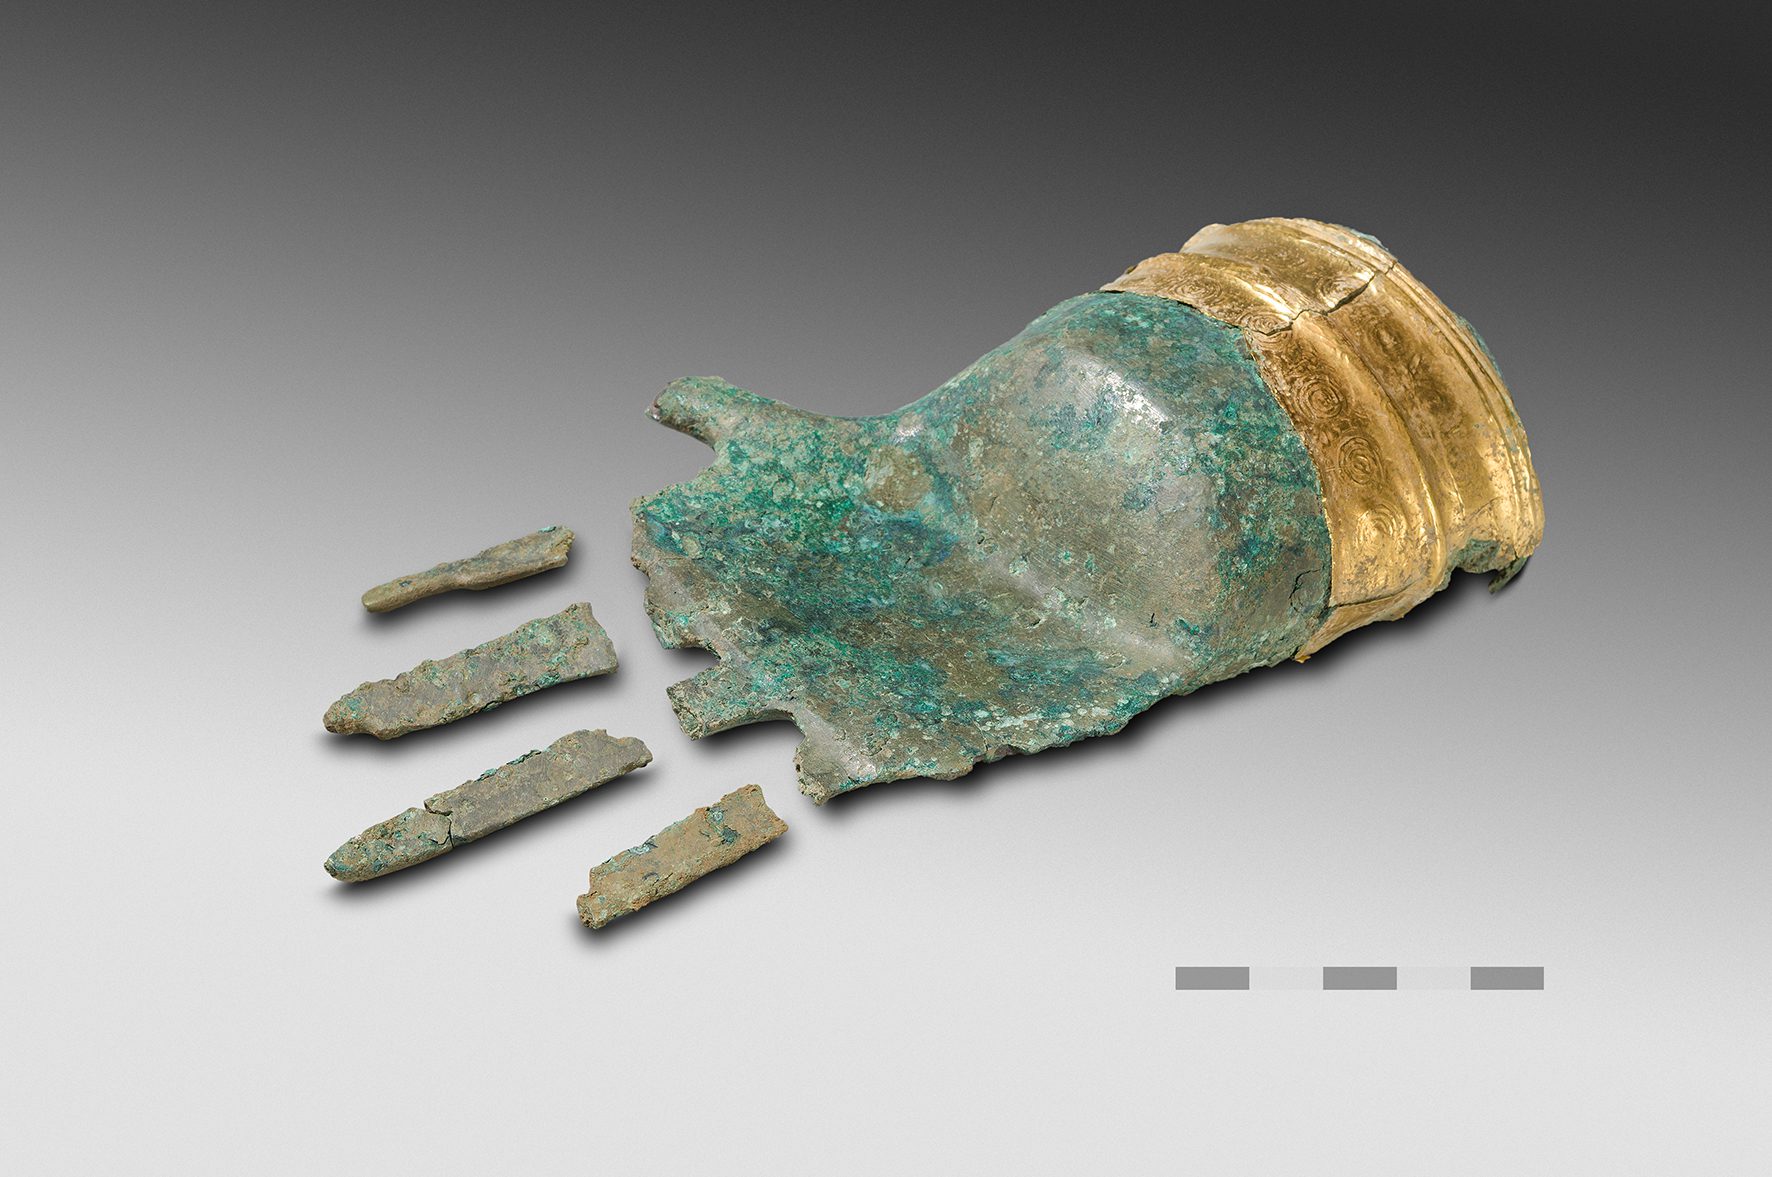 Bronze-age prothestic hand found in ancient tomb of Prêles: